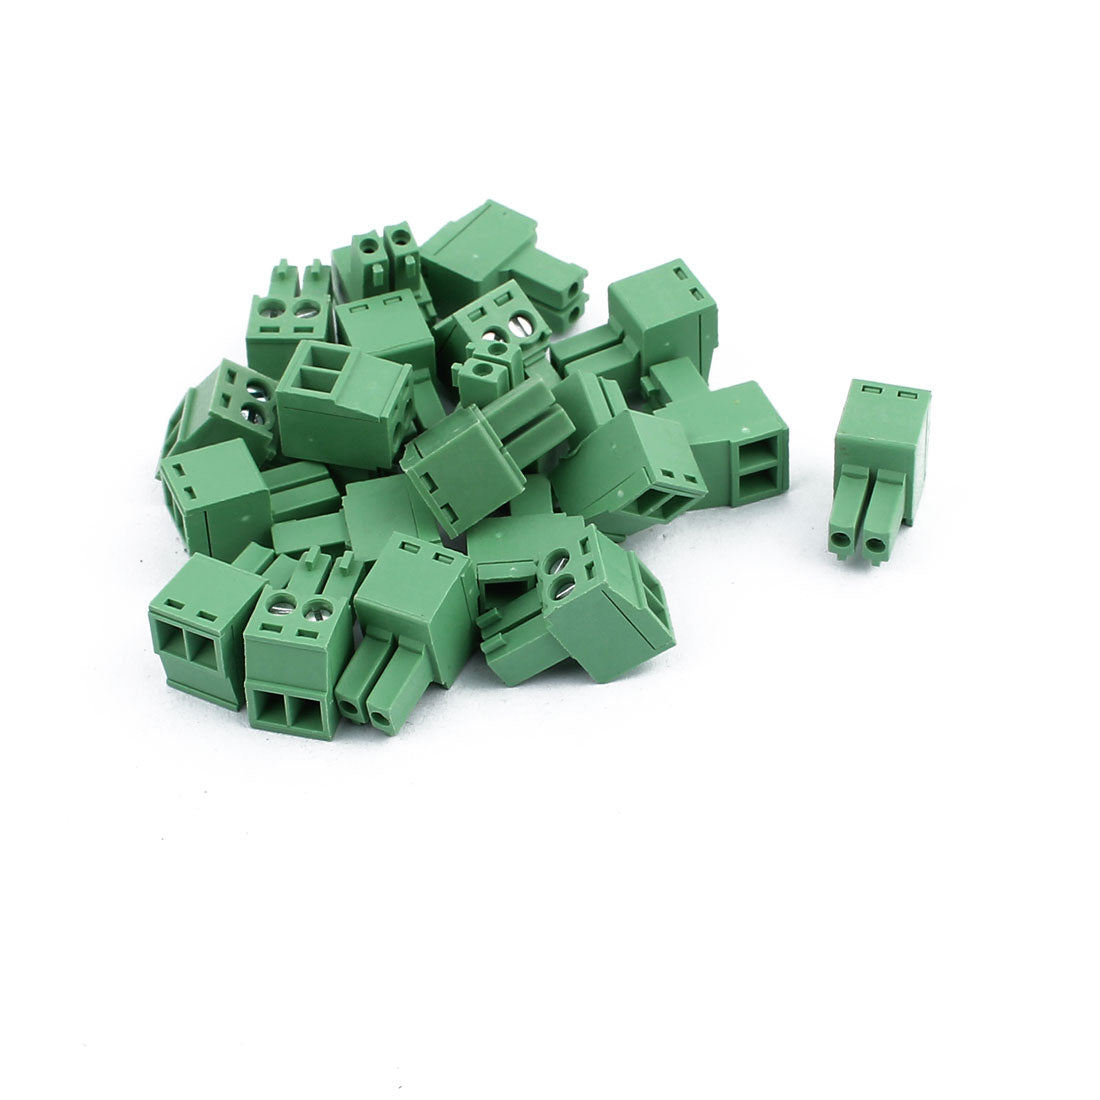 uxcell Uxcell 20Pcs 300V KF2EDGK 3.5mm Pitch 2-Pin PCB Screw Terminal Block Connector